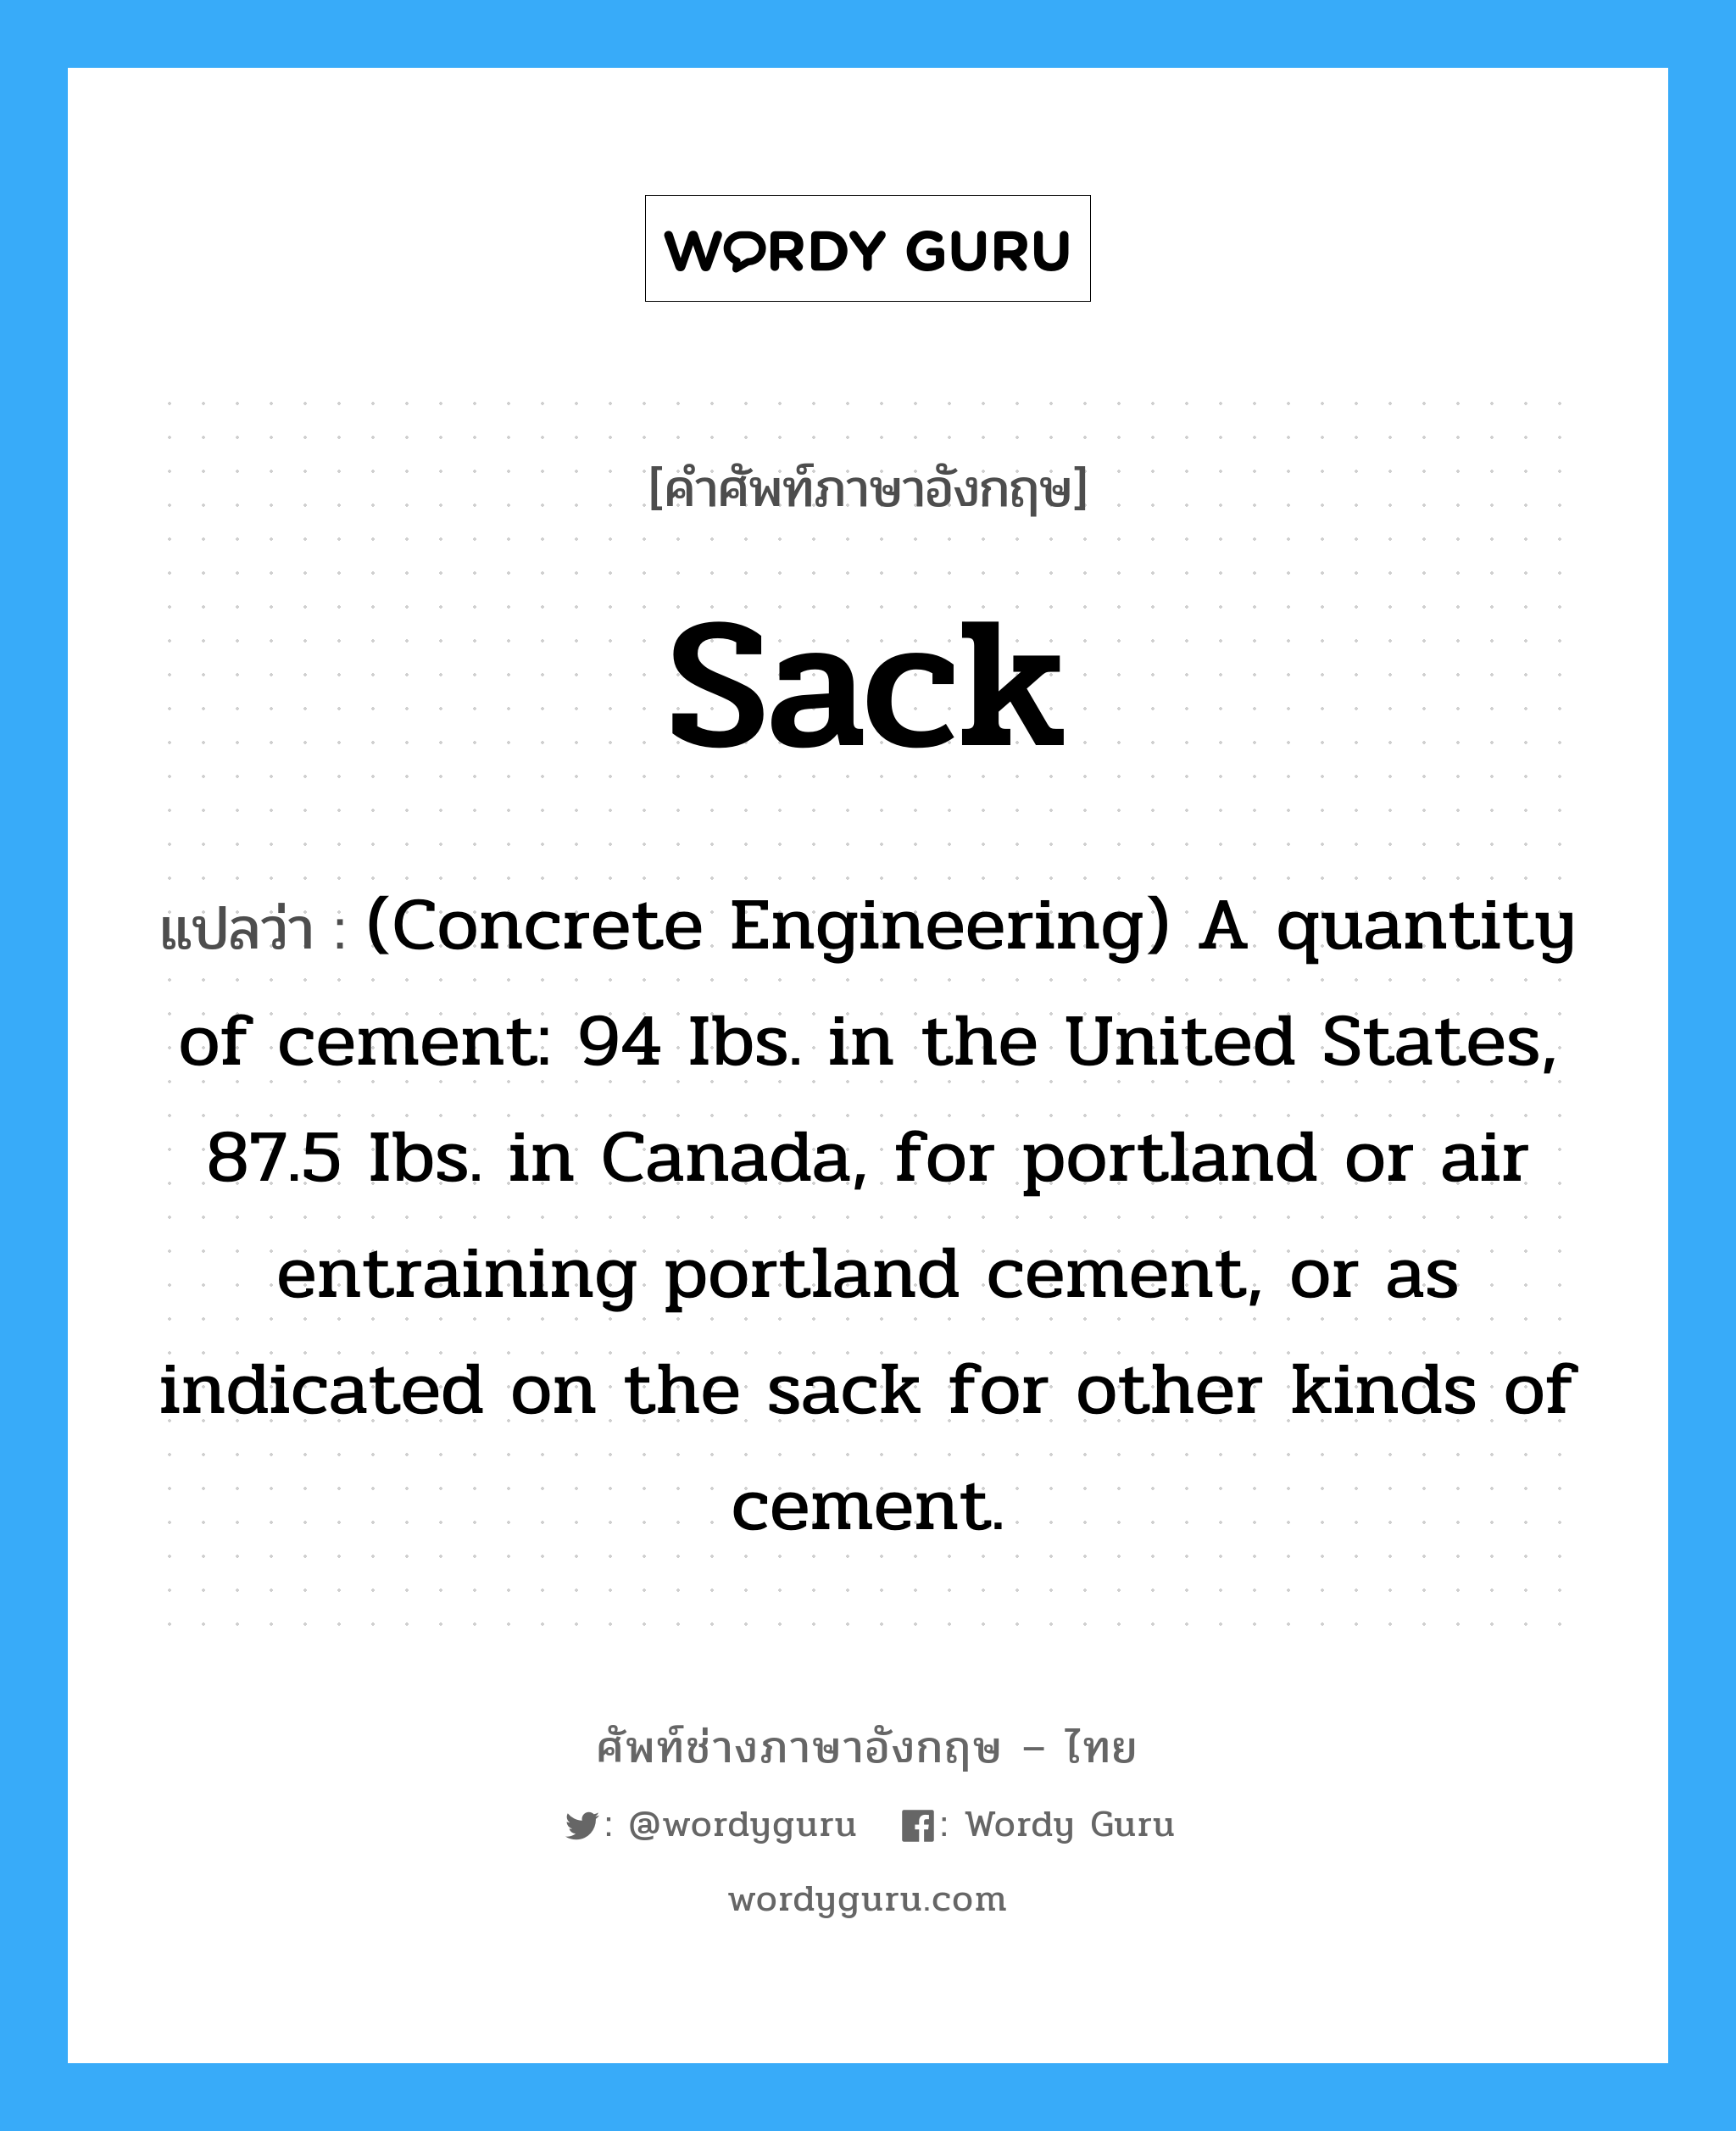 (Concrete Engineering) A quantity of cement: 94 Ibs. in the United States, 87.5 Ibs. in Canada, for portland or air entraining portland cement, or as indicated on the sack for other kinds of cement. ภาษาอังกฤษ?, คำศัพท์ช่างภาษาอังกฤษ - ไทย (Concrete Engineering) A quantity of cement: 94 Ibs. in the United States, 87.5 Ibs. in Canada, for portland or air entraining portland cement, or as indicated on the sack for other kinds of cement. คำศัพท์ภาษาอังกฤษ (Concrete Engineering) A quantity of cement: 94 Ibs. in the United States, 87.5 Ibs. in Canada, for portland or air entraining portland cement, or as indicated on the sack for other kinds of cement. แปลว่า Sack